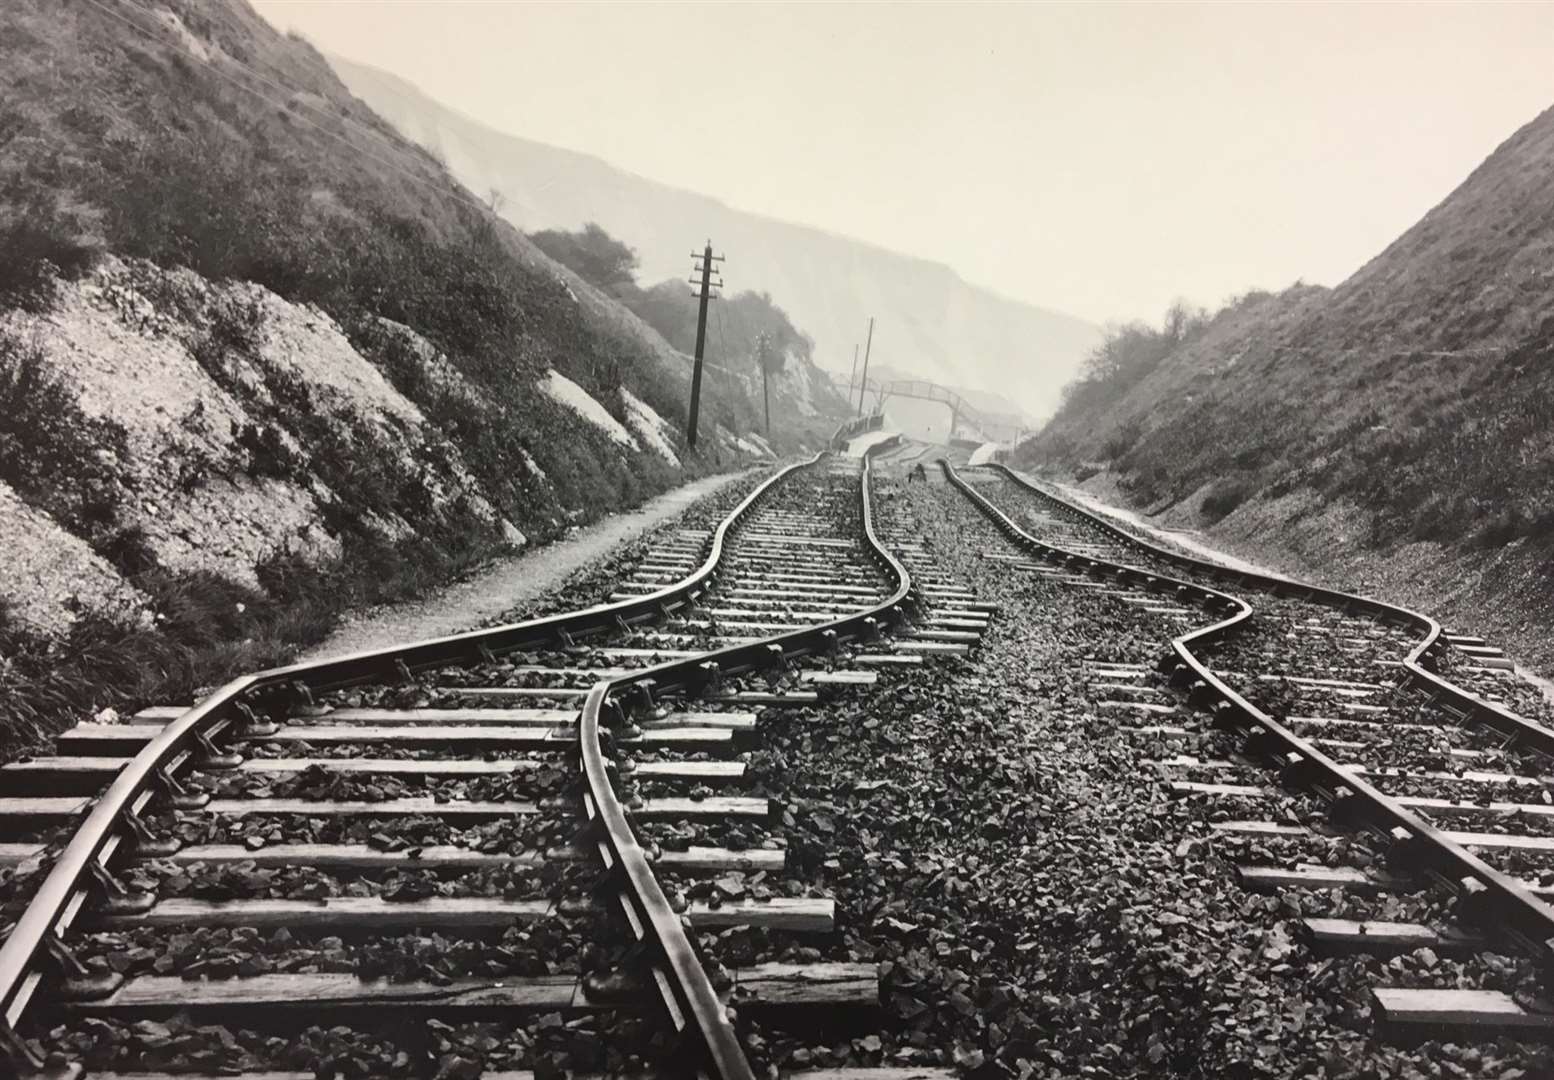 Ground movement during the ‘Great Fall’ left the tracks twisted. Picture: Derek Butcher / Network Rail